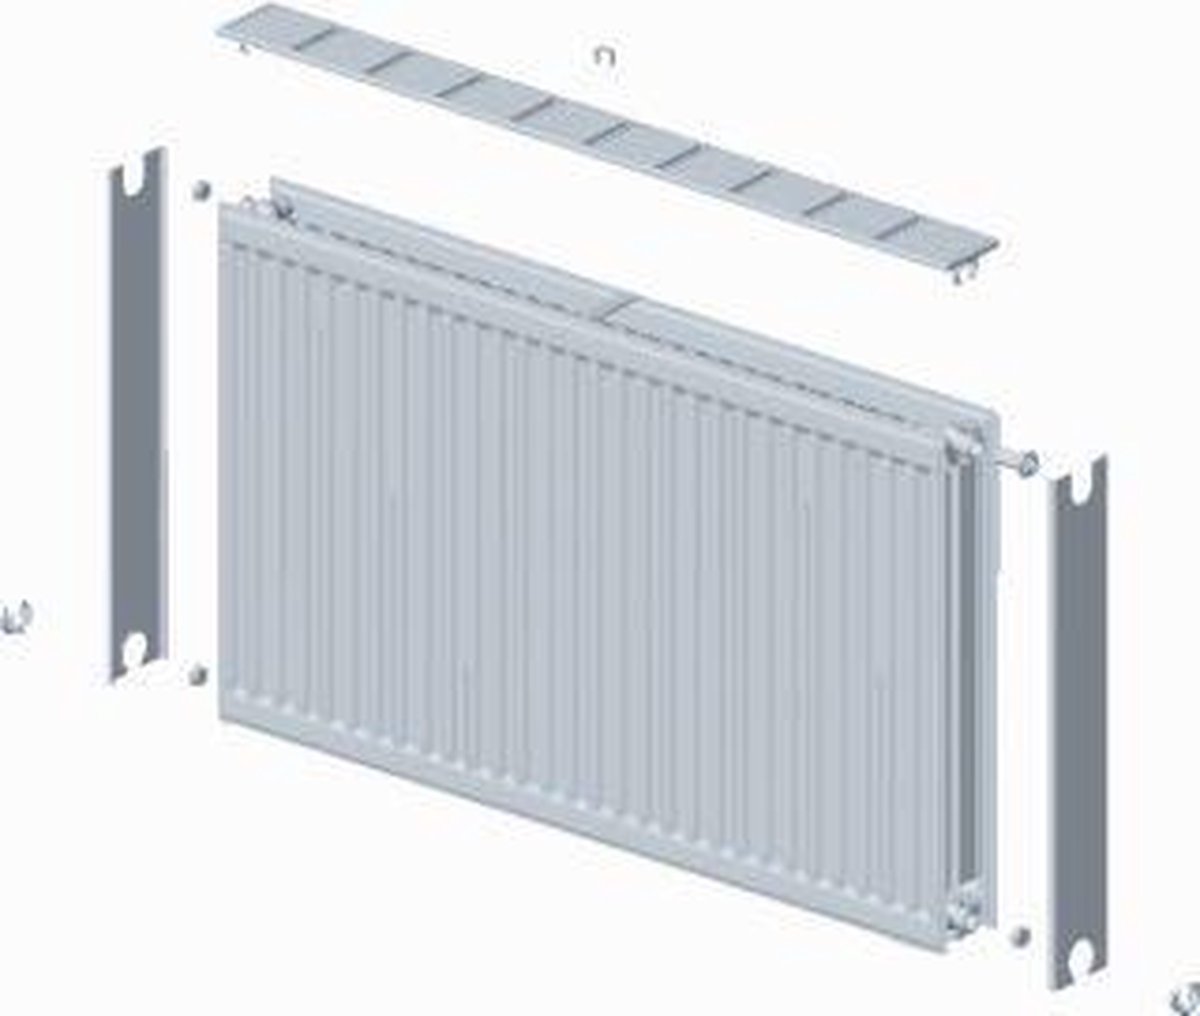 Stelrad paneelradiator Novello, staal, wit, (hxlxd) 600x1400x100mm, 22